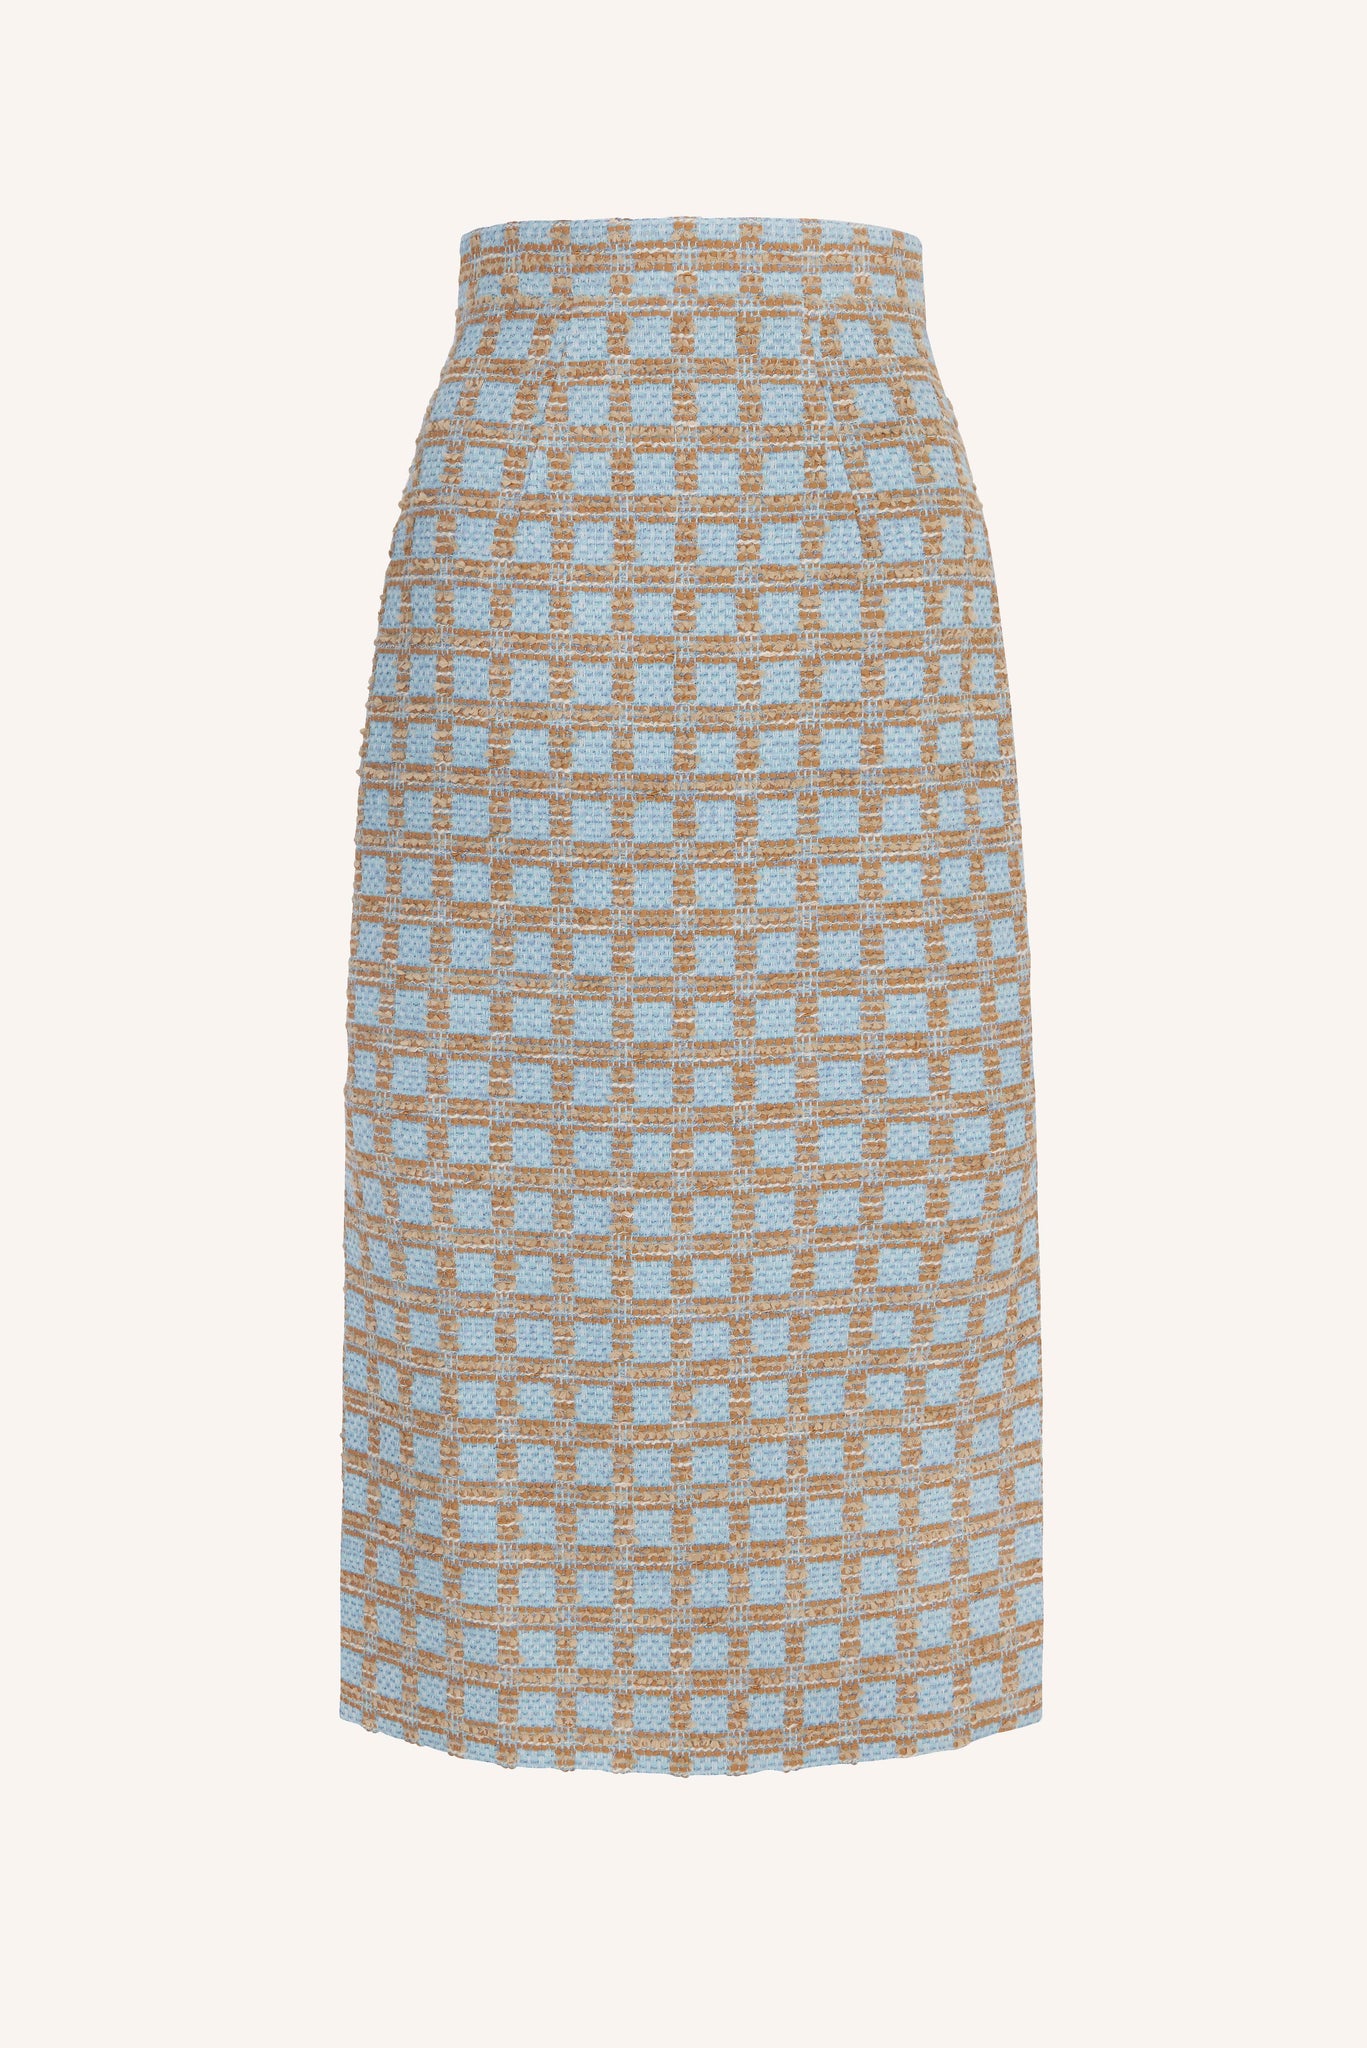 Ariceli Skirt in Beige And Blue Check Boucle | Emilia Wickstead